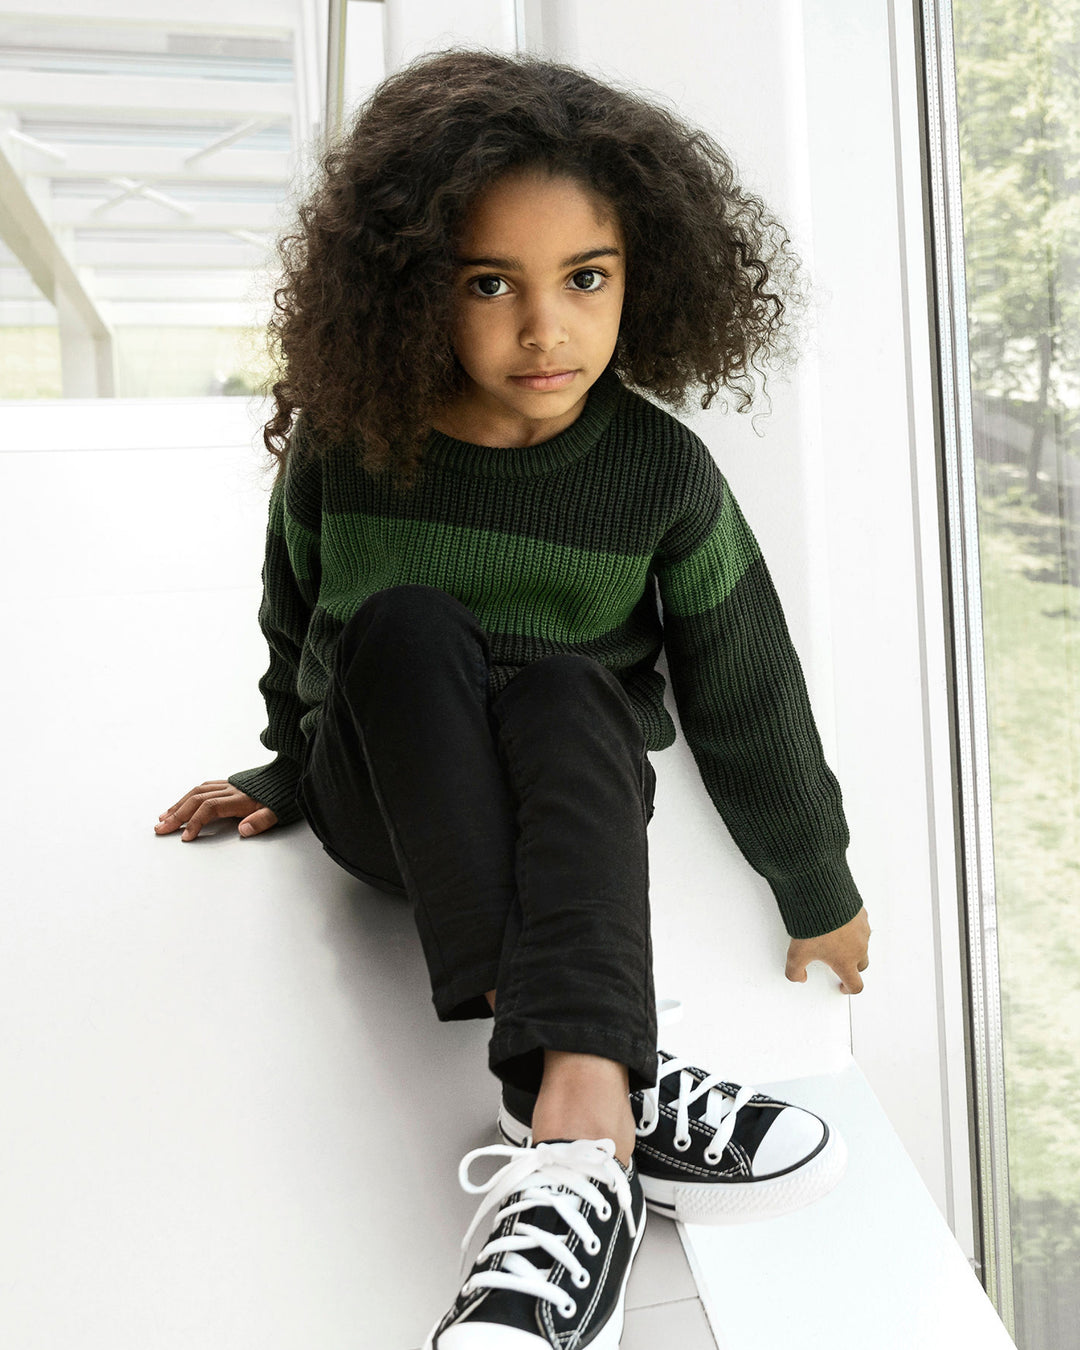 22 ENFANTS CHANDAILS EN TRICOT | YOUTH KNITTED SWEATERS